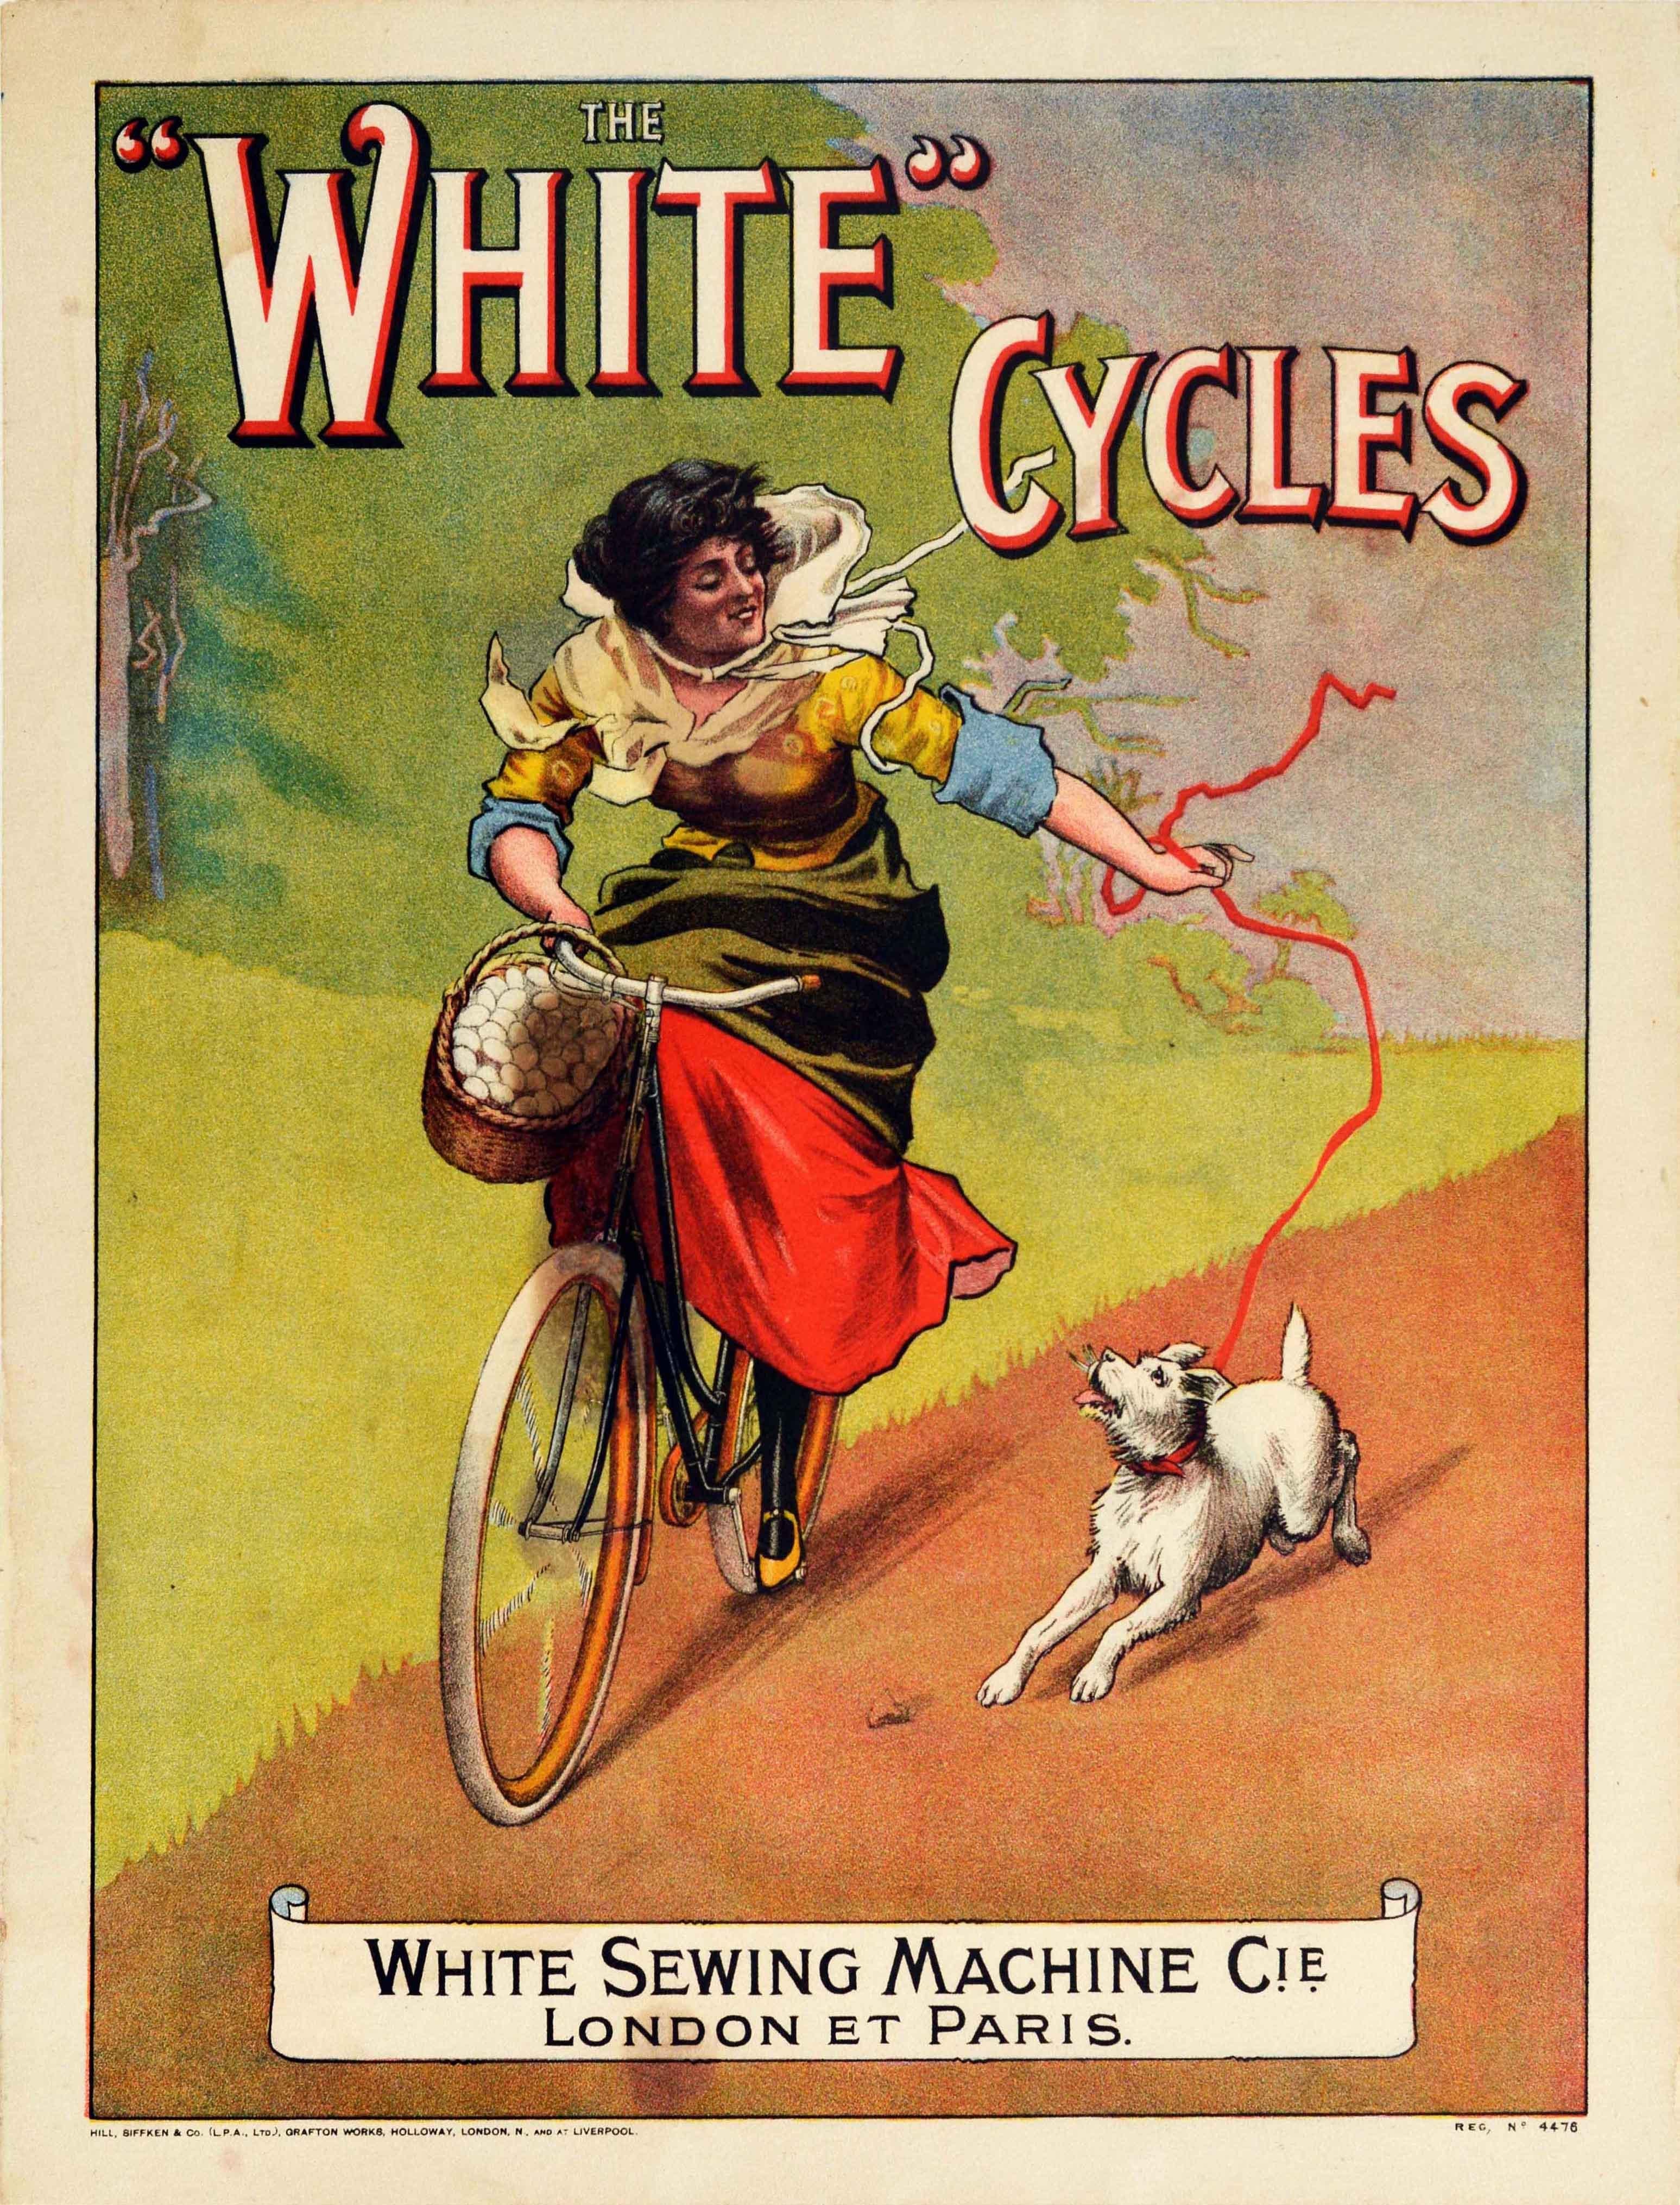 Unknown Print - Original Antique Bicycle Poster White Cycles White Sewing Machine Cyclist & Dog